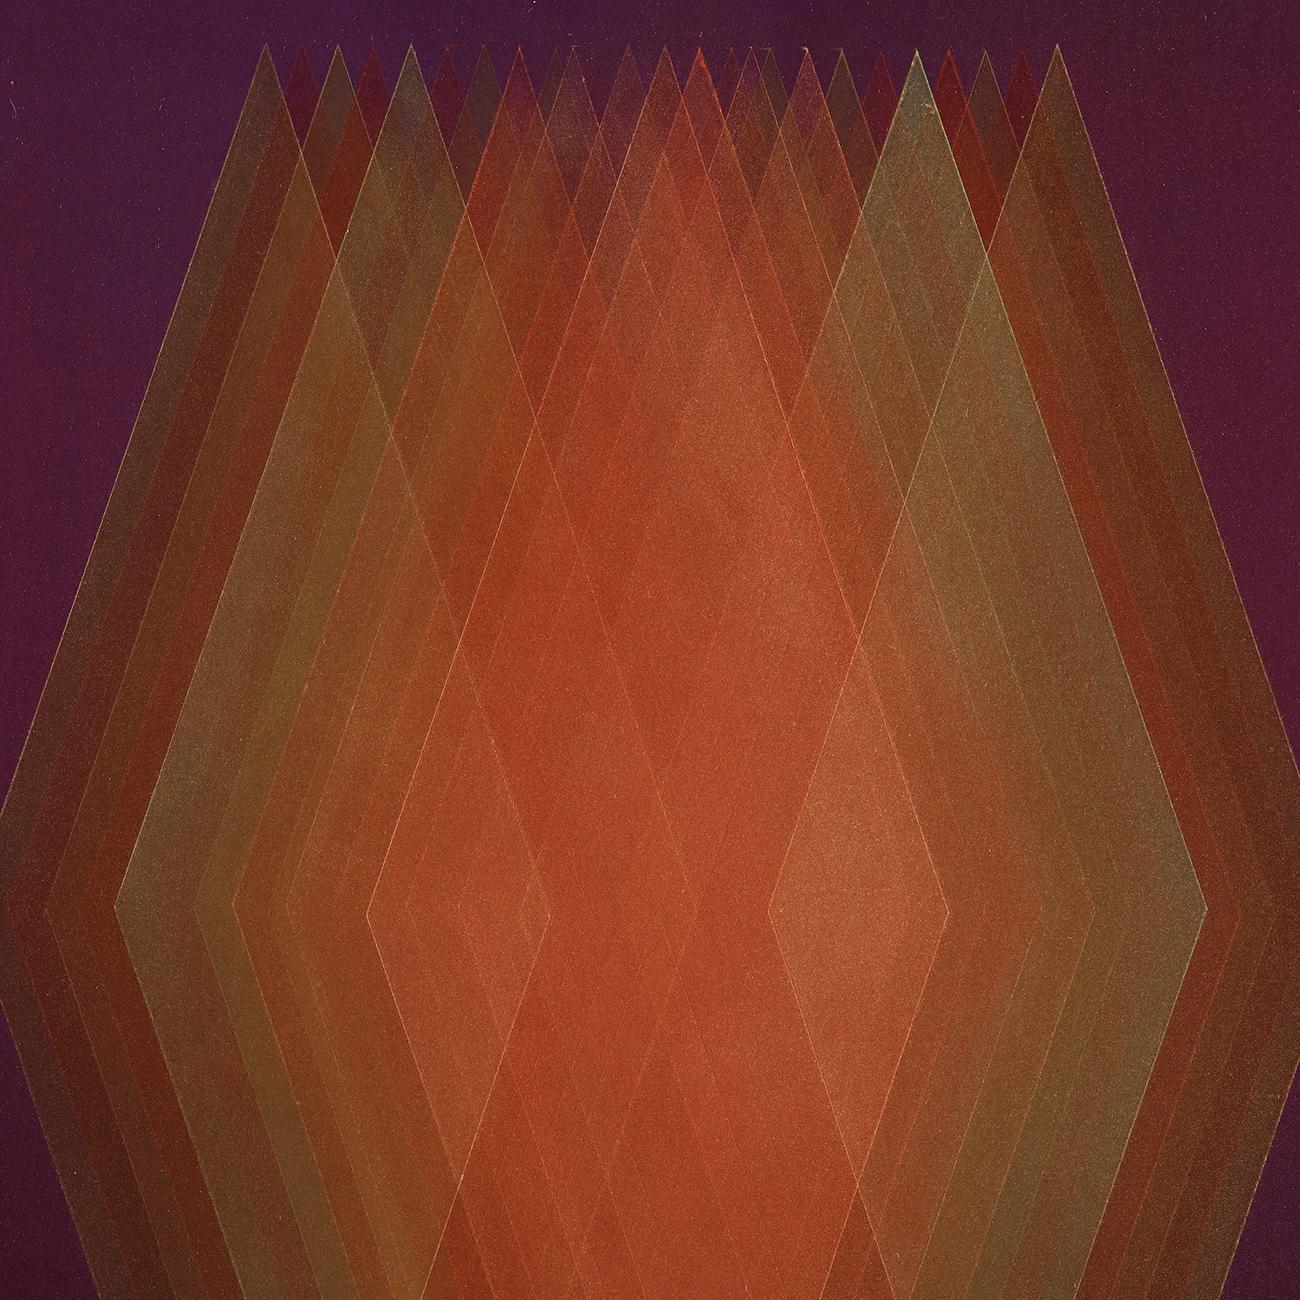 Prism (Purple-Copper Orange) (Abstract painting) - Brown Abstract Painting by Bernadette Jiyong Frank